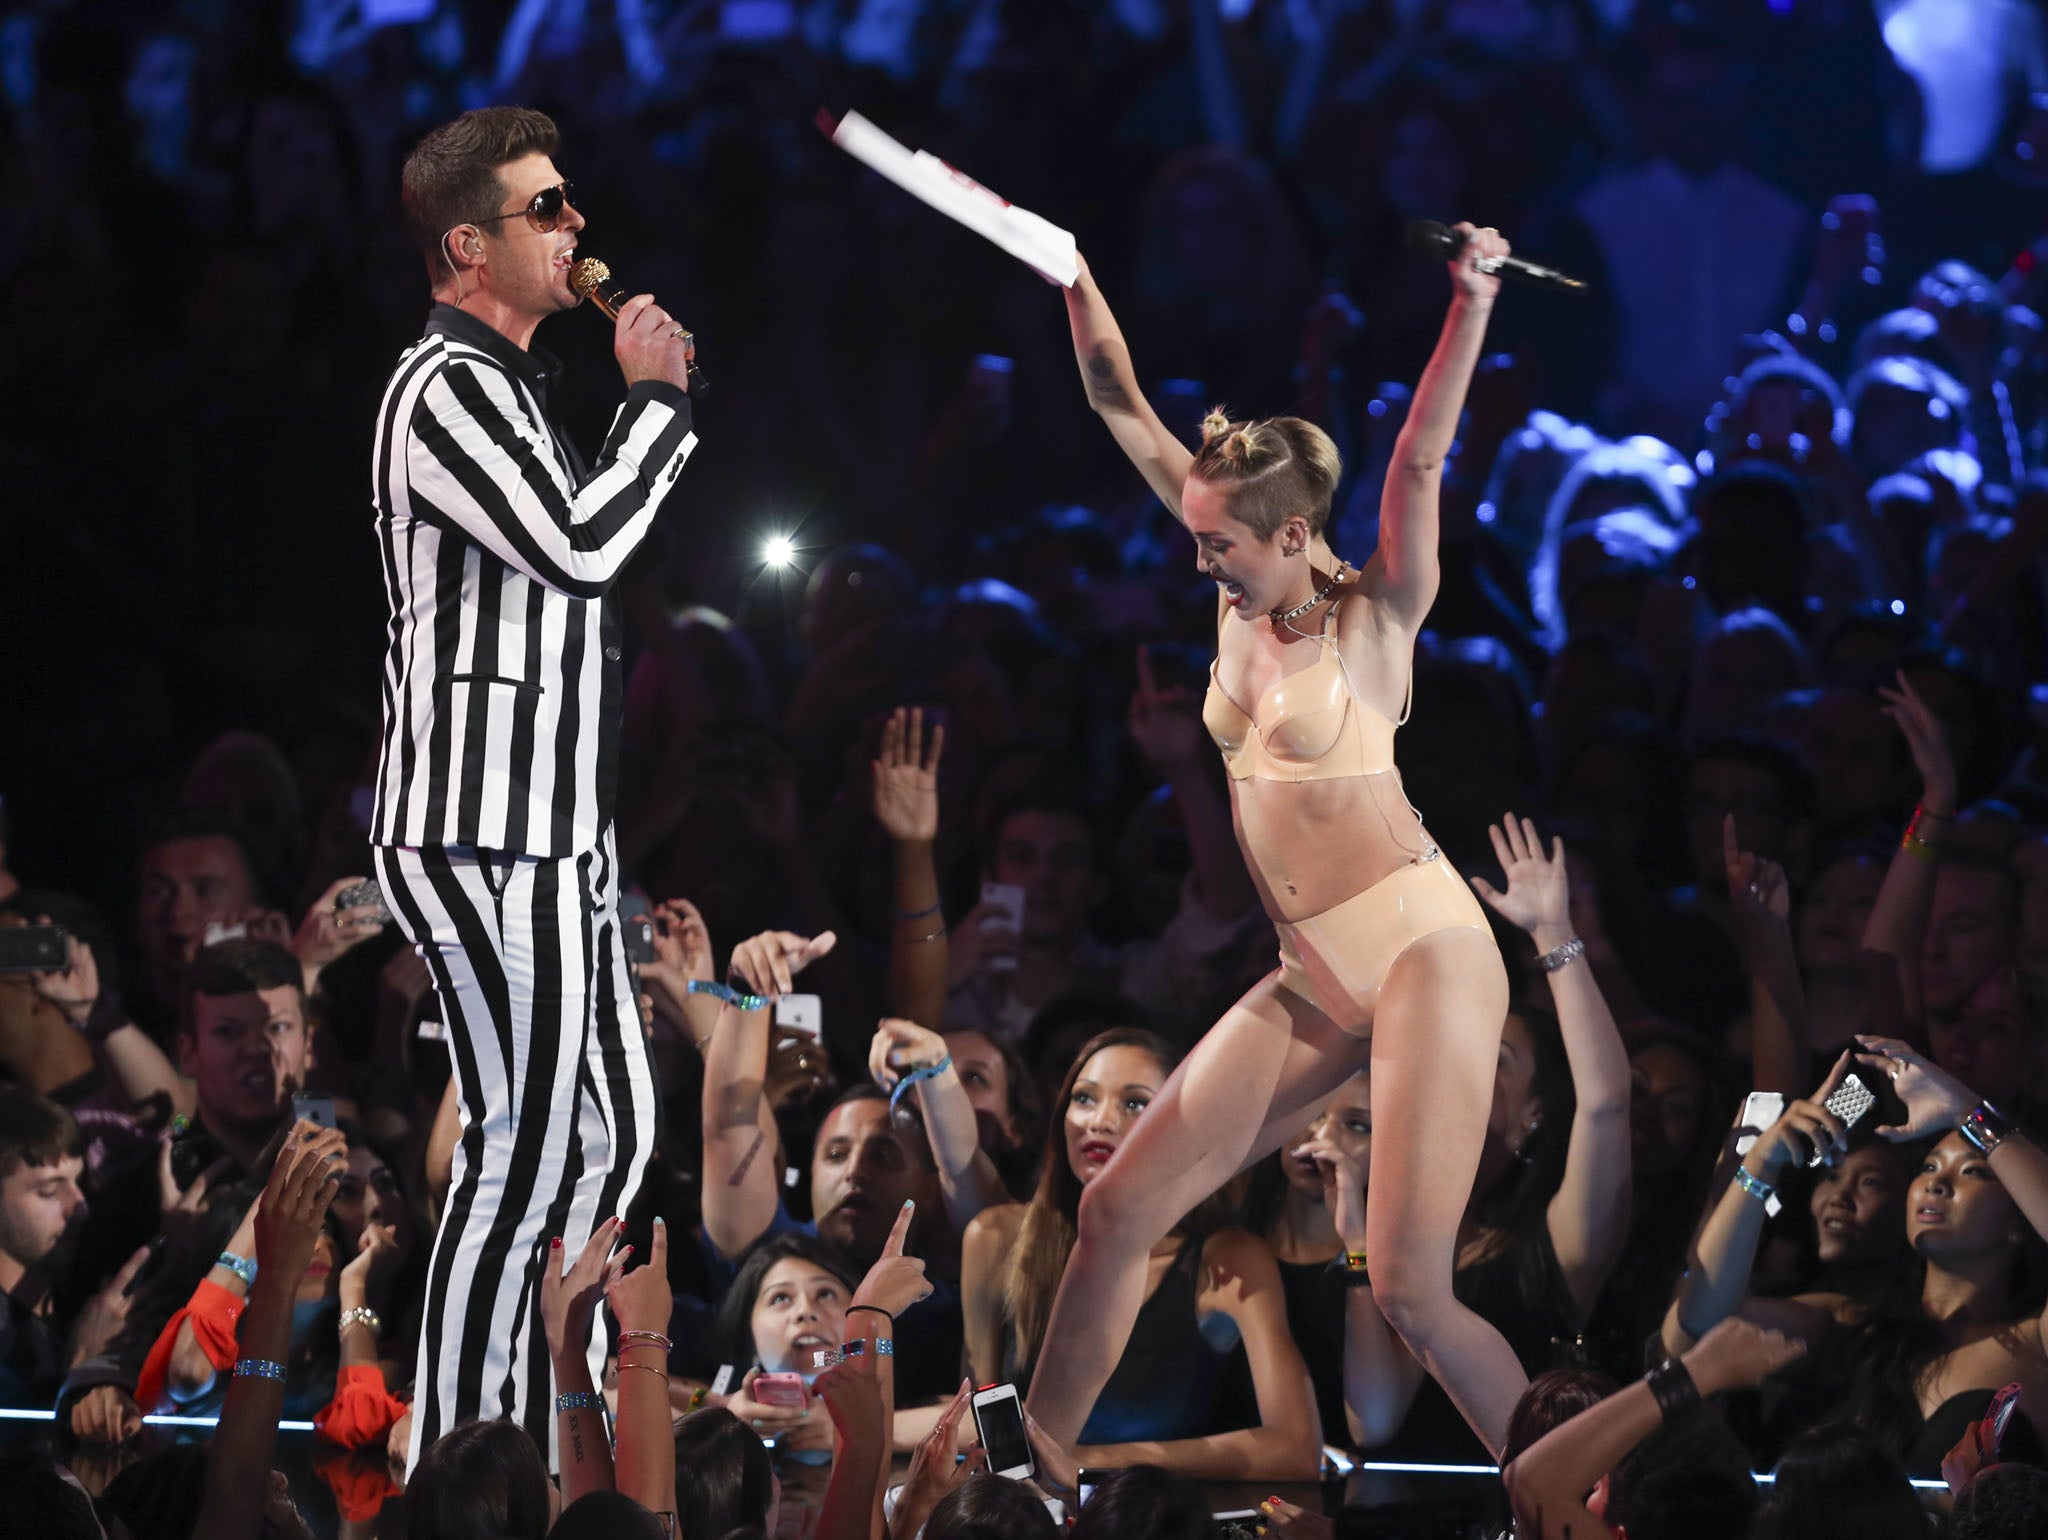 Miley Cyrus says Robin Thicke wanted her as naked as possible at the VMAs pic